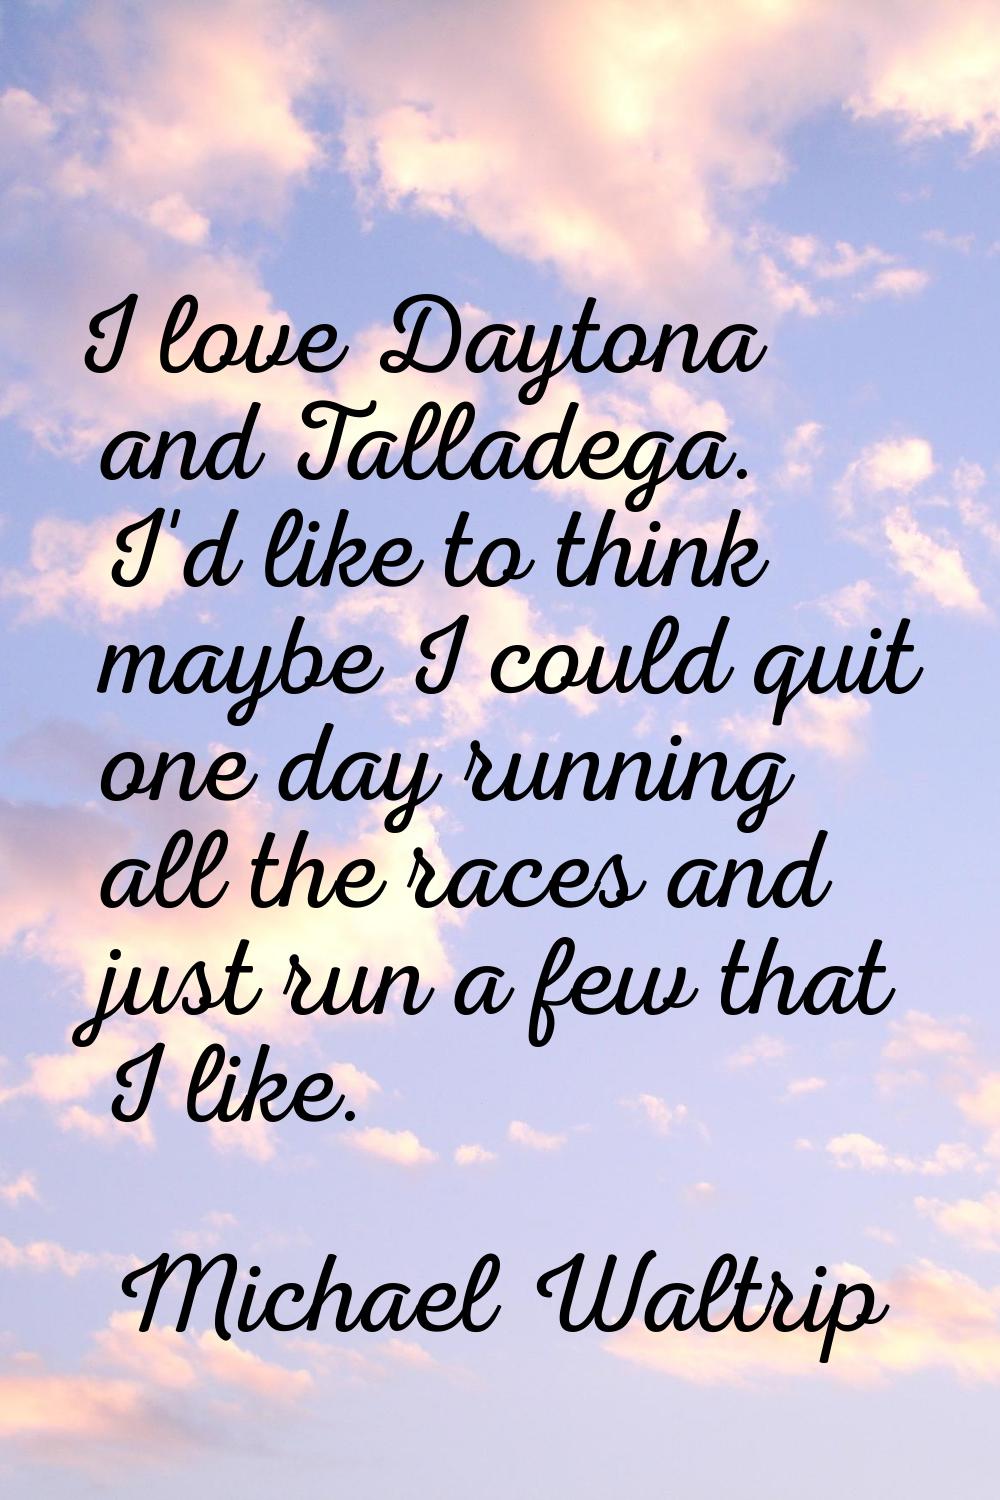 I love Daytona and Talladega. I'd like to think maybe I could quit one day running all the races an